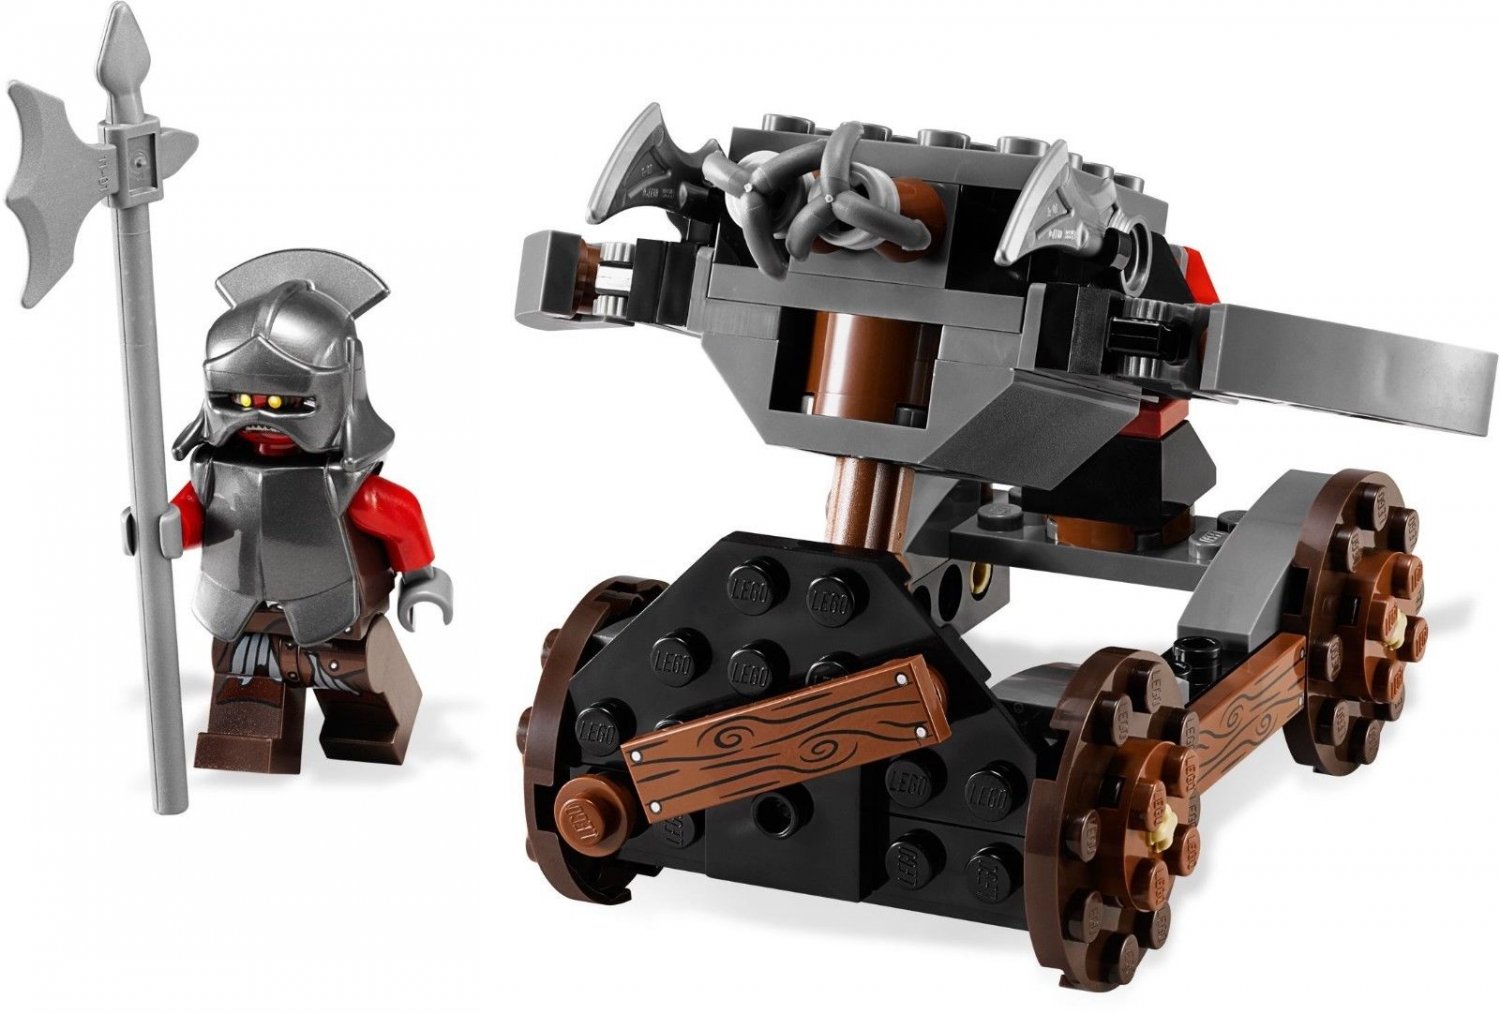 LEGO 9471 The Lord of The Rings Urukhai Army